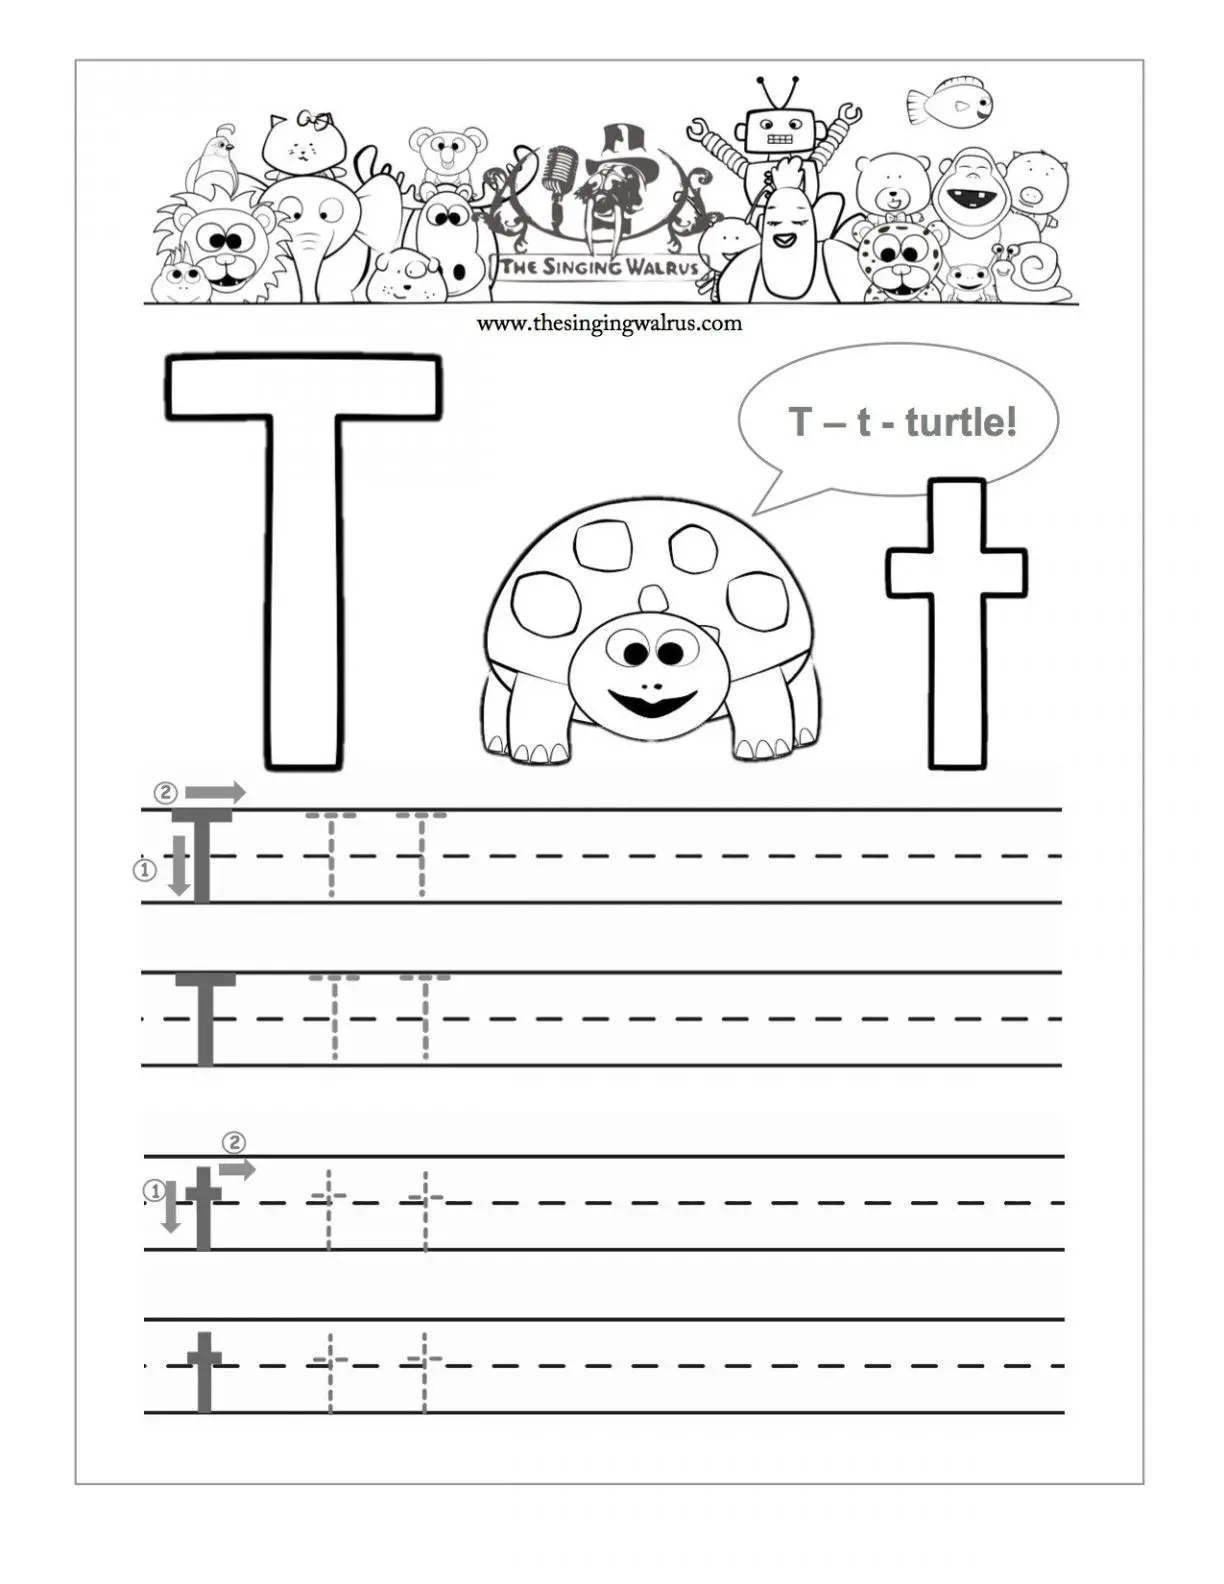 20 Learning the Letter T Worksheets Kitty Baby Love